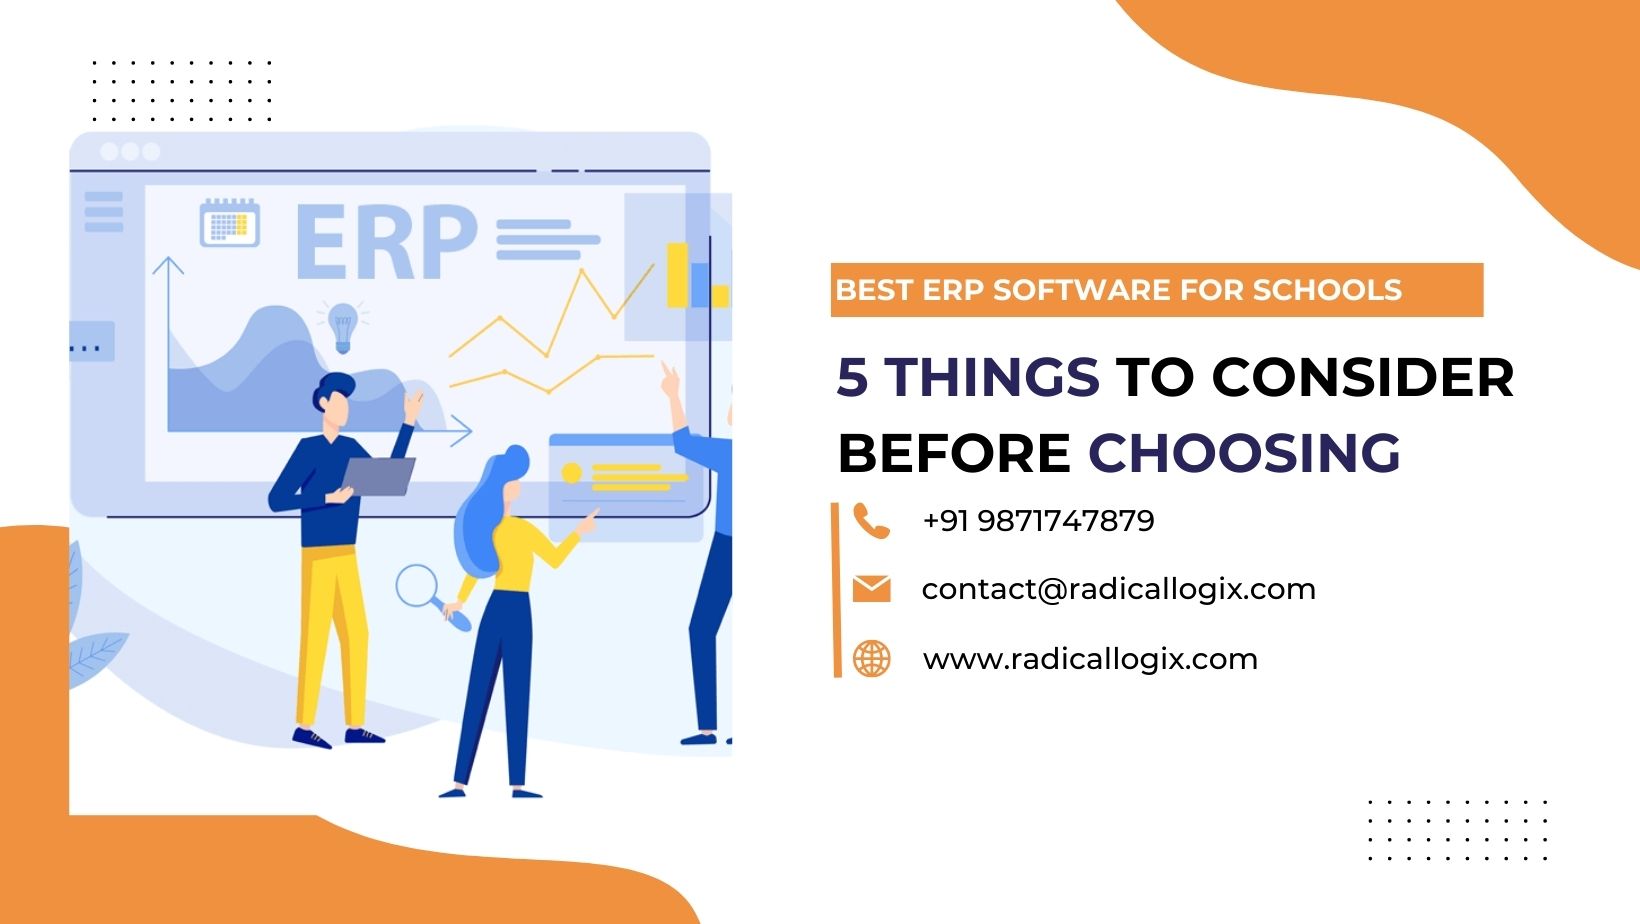 5 Things to Consider Before Choosing the Best ERP Software for schools